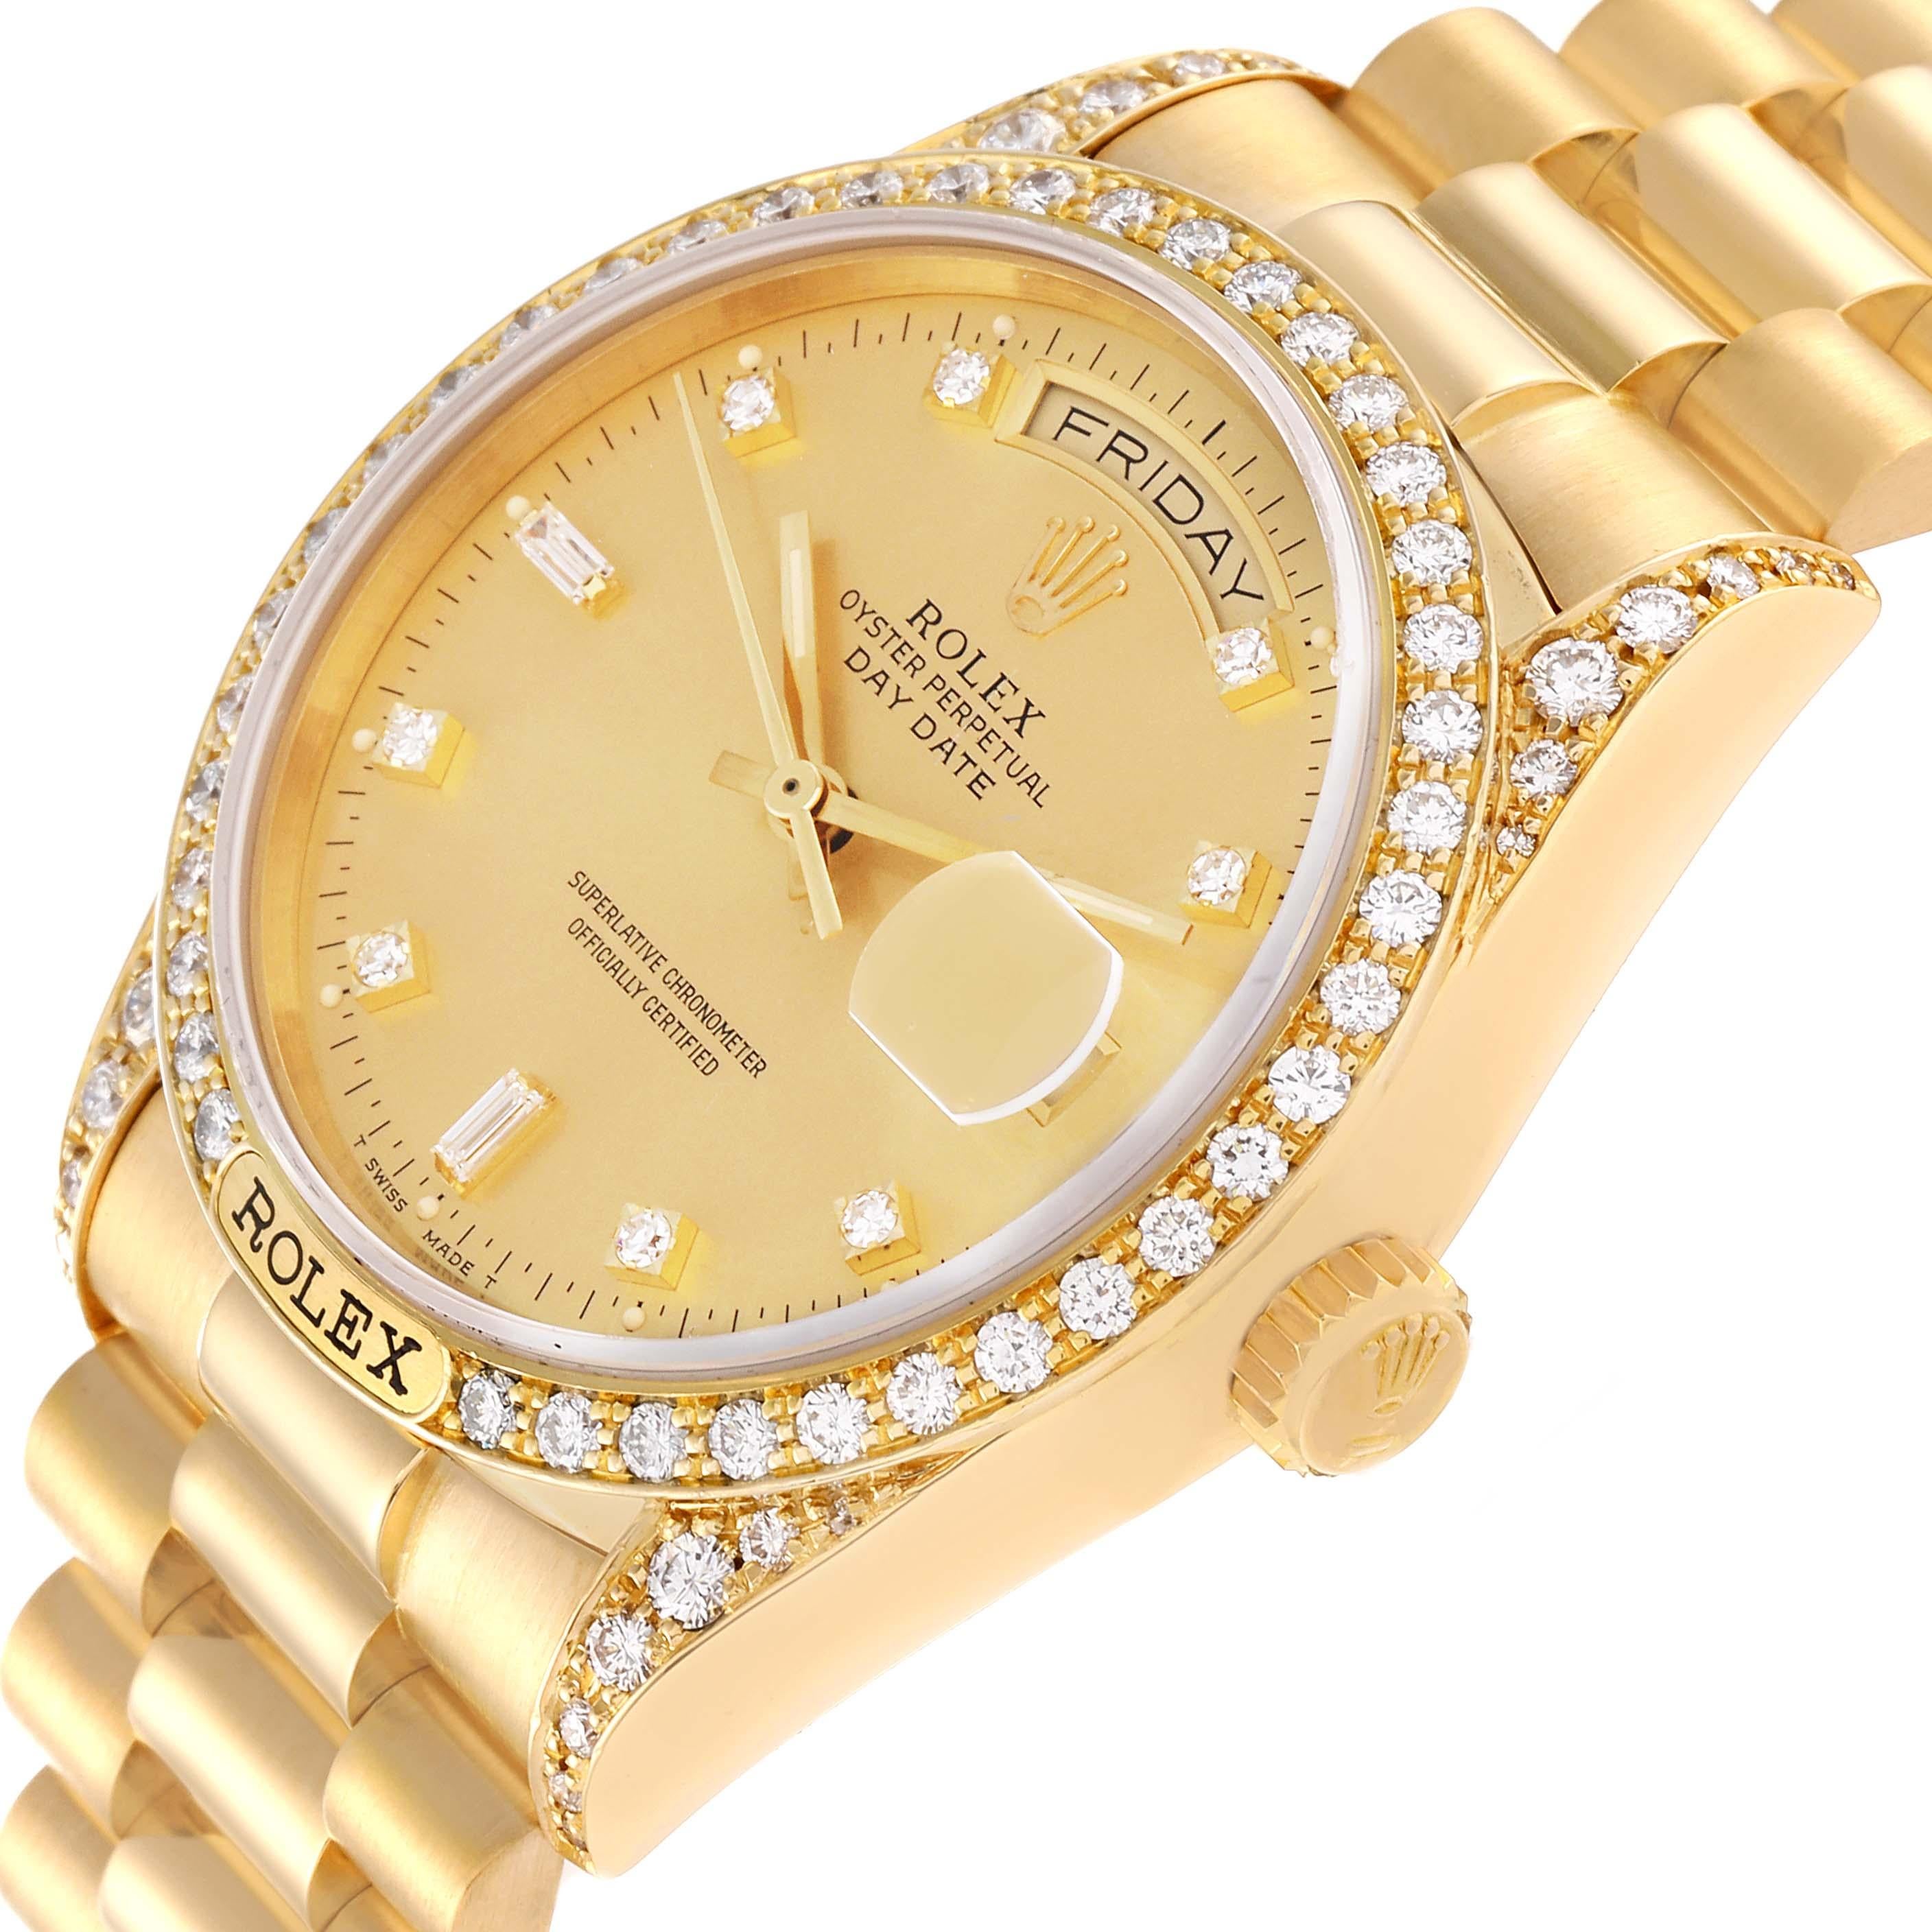 Rolex President Day-Date Yellow Gold Diamond Mens Watch 18138 For Sale 4